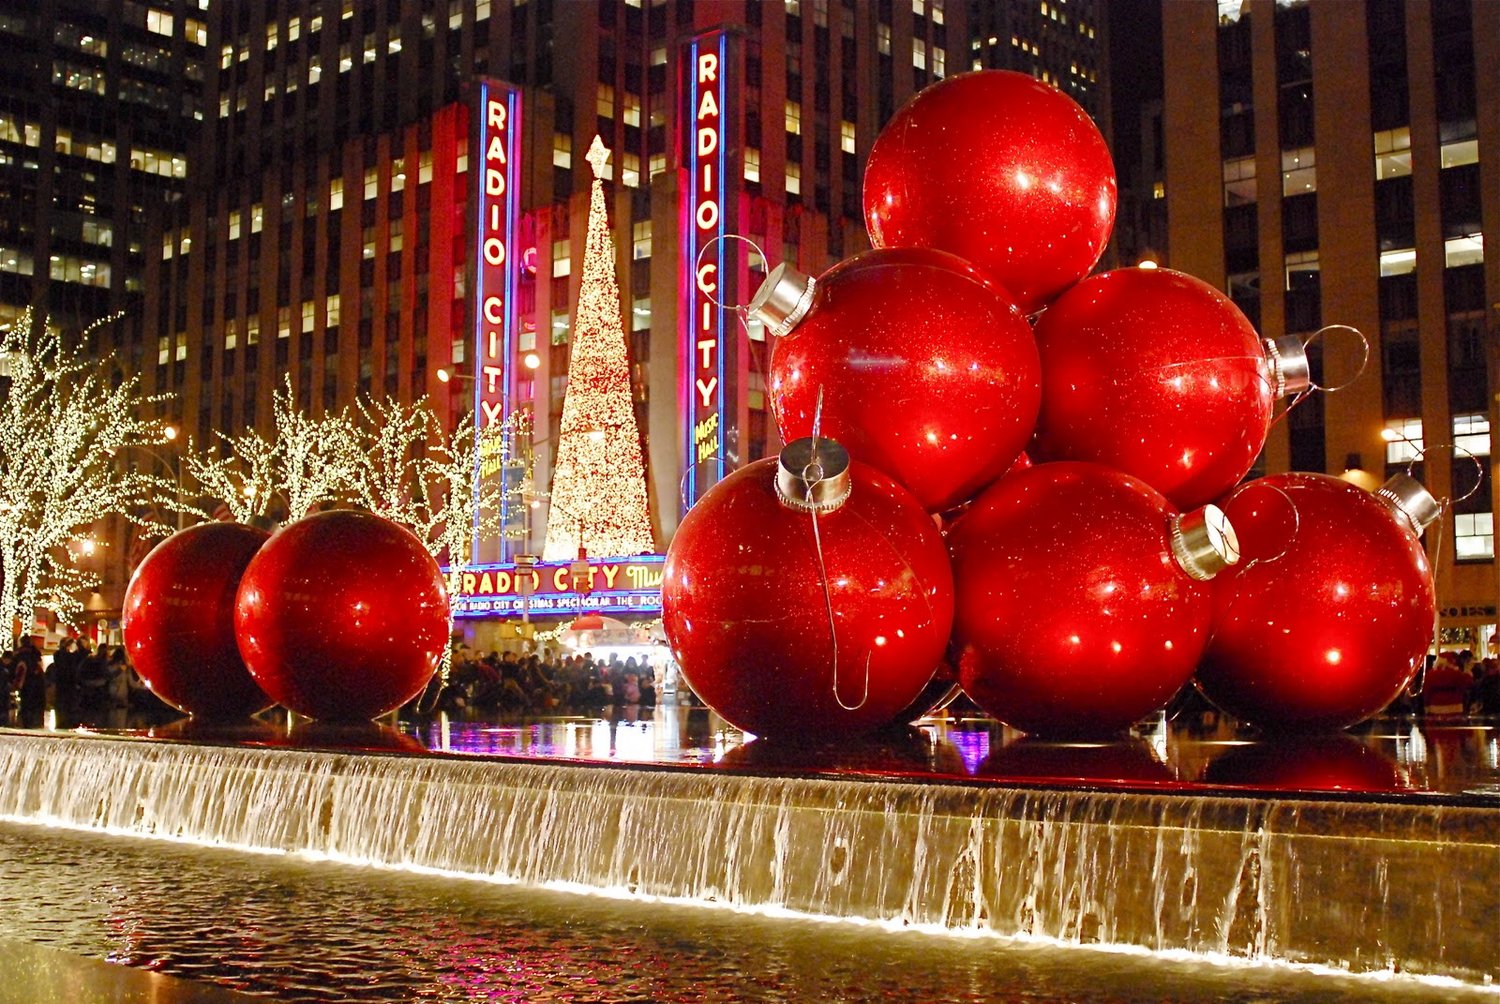 Christmas In New York City - Holiday Guide - Glam of NYC